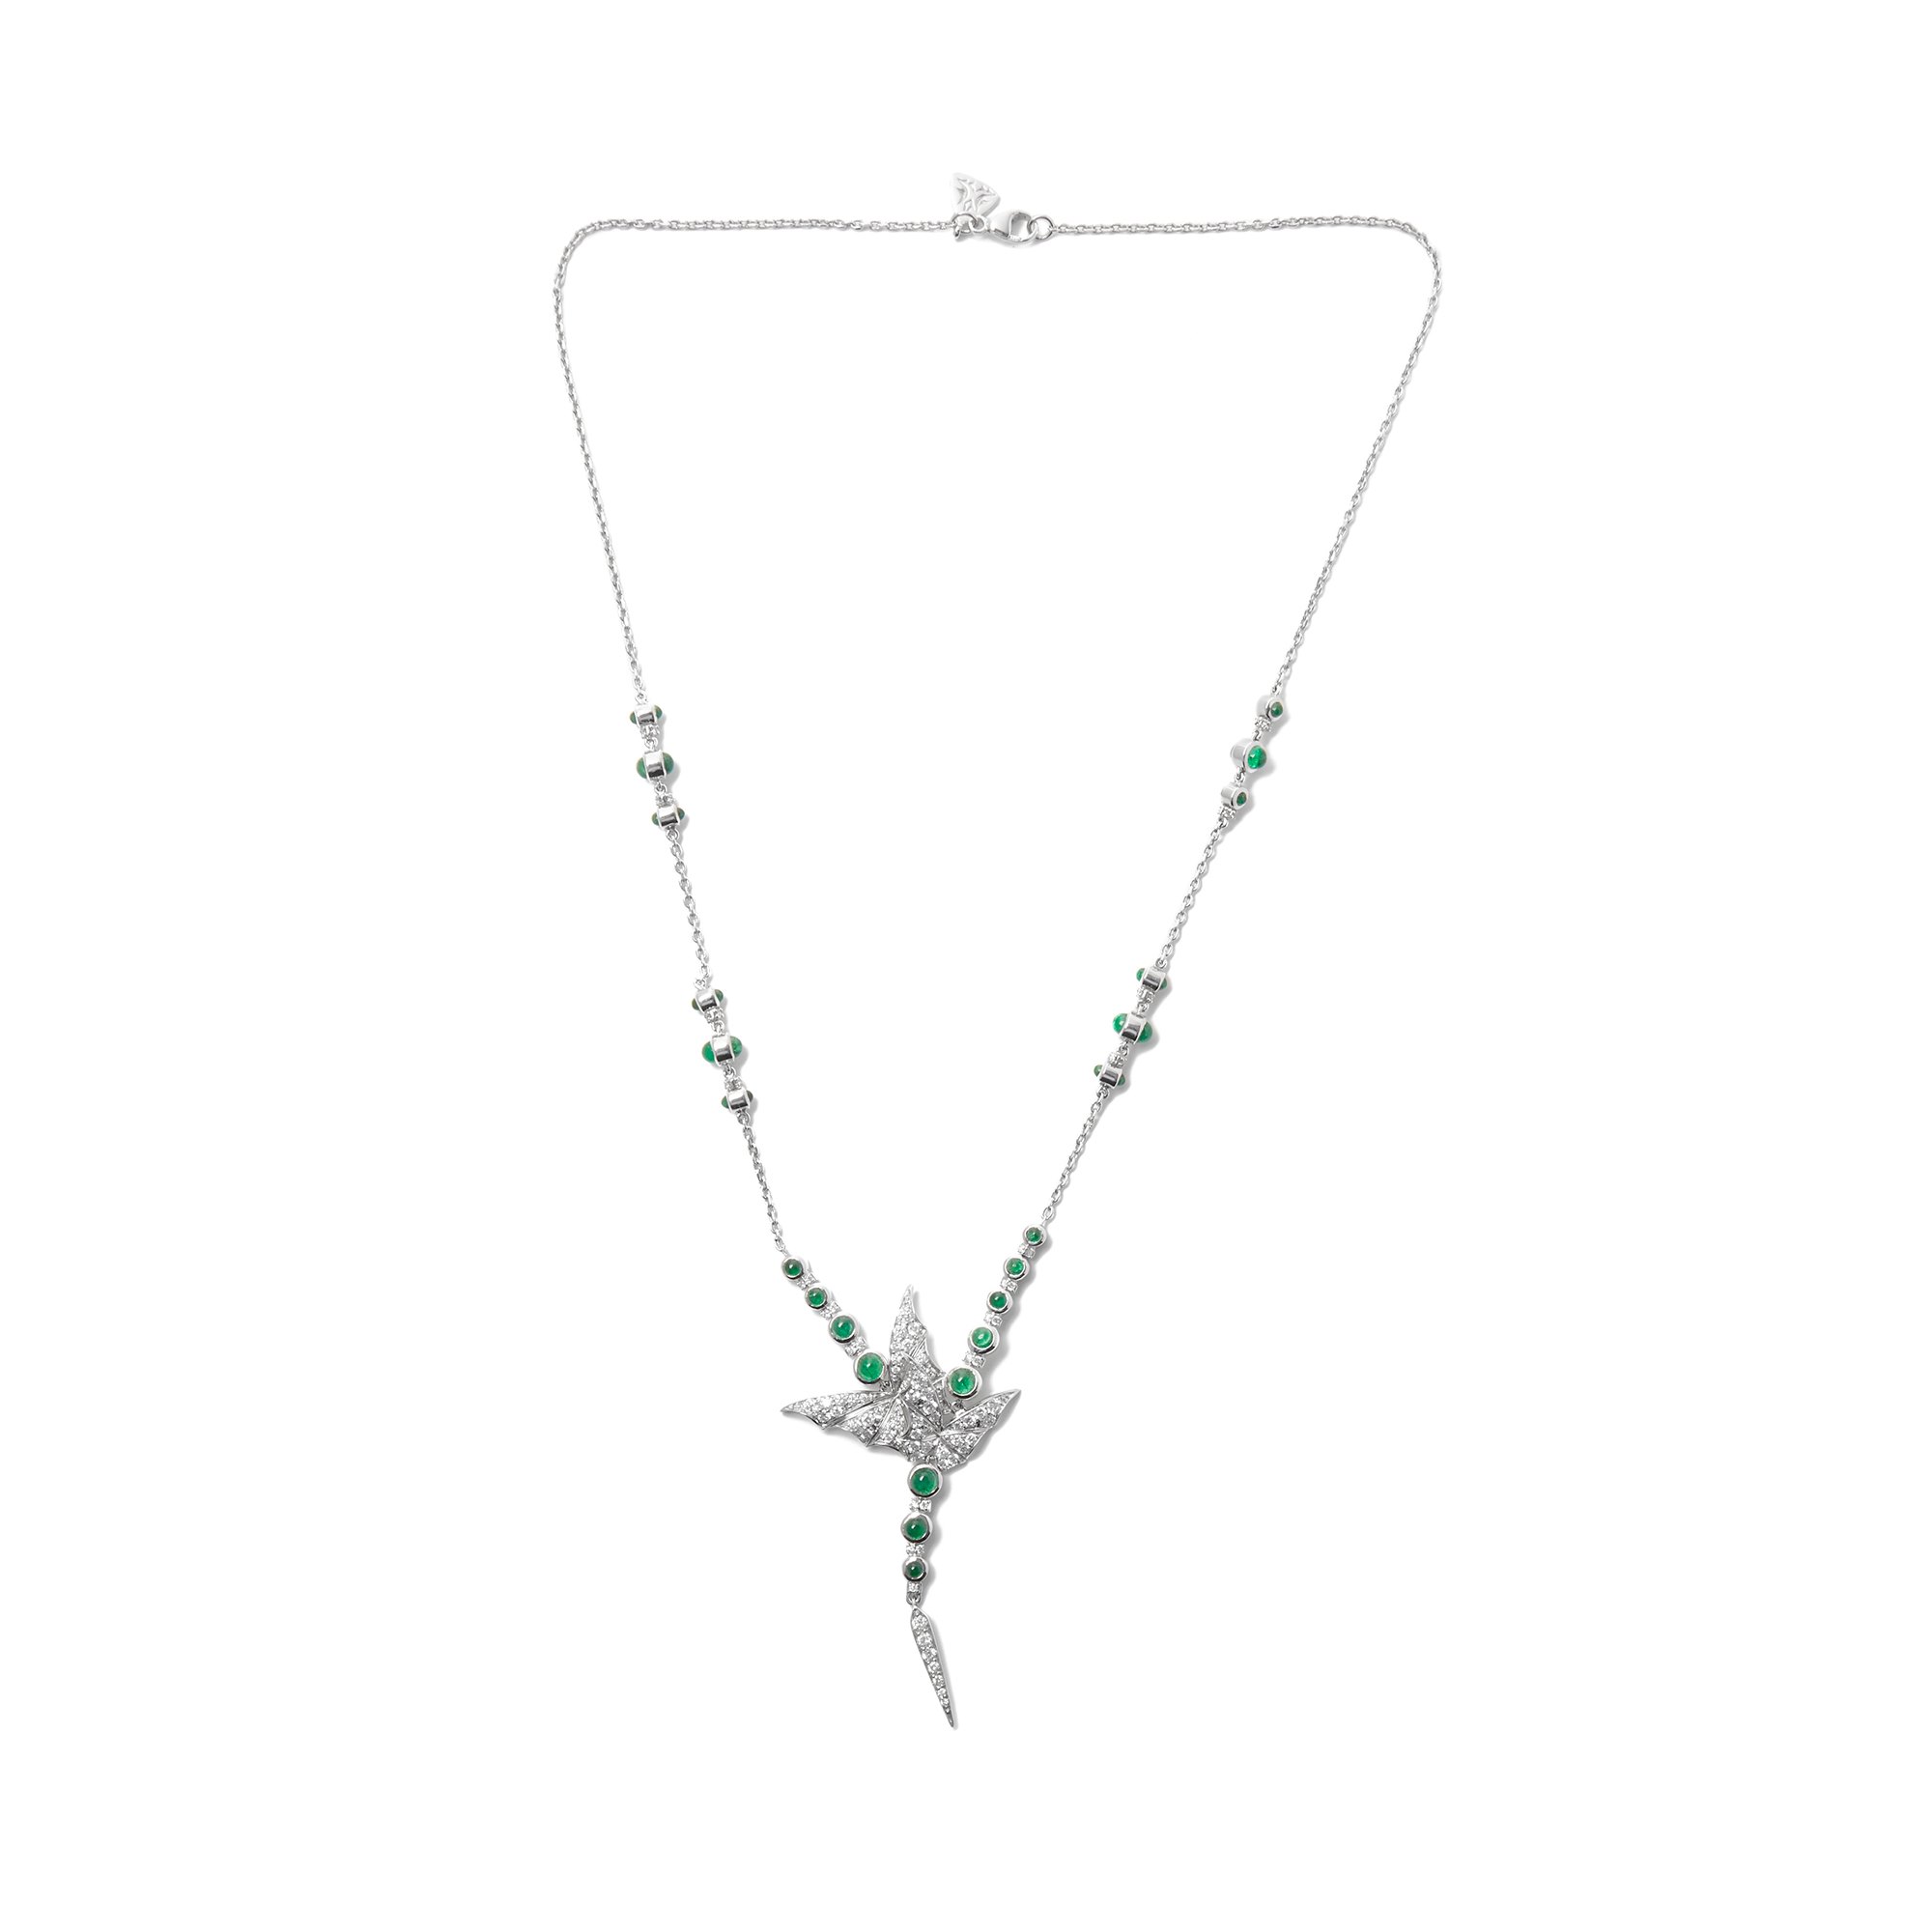 Stephen Webster Fly by Night 18ct Gold Diamond and Emerald necklace